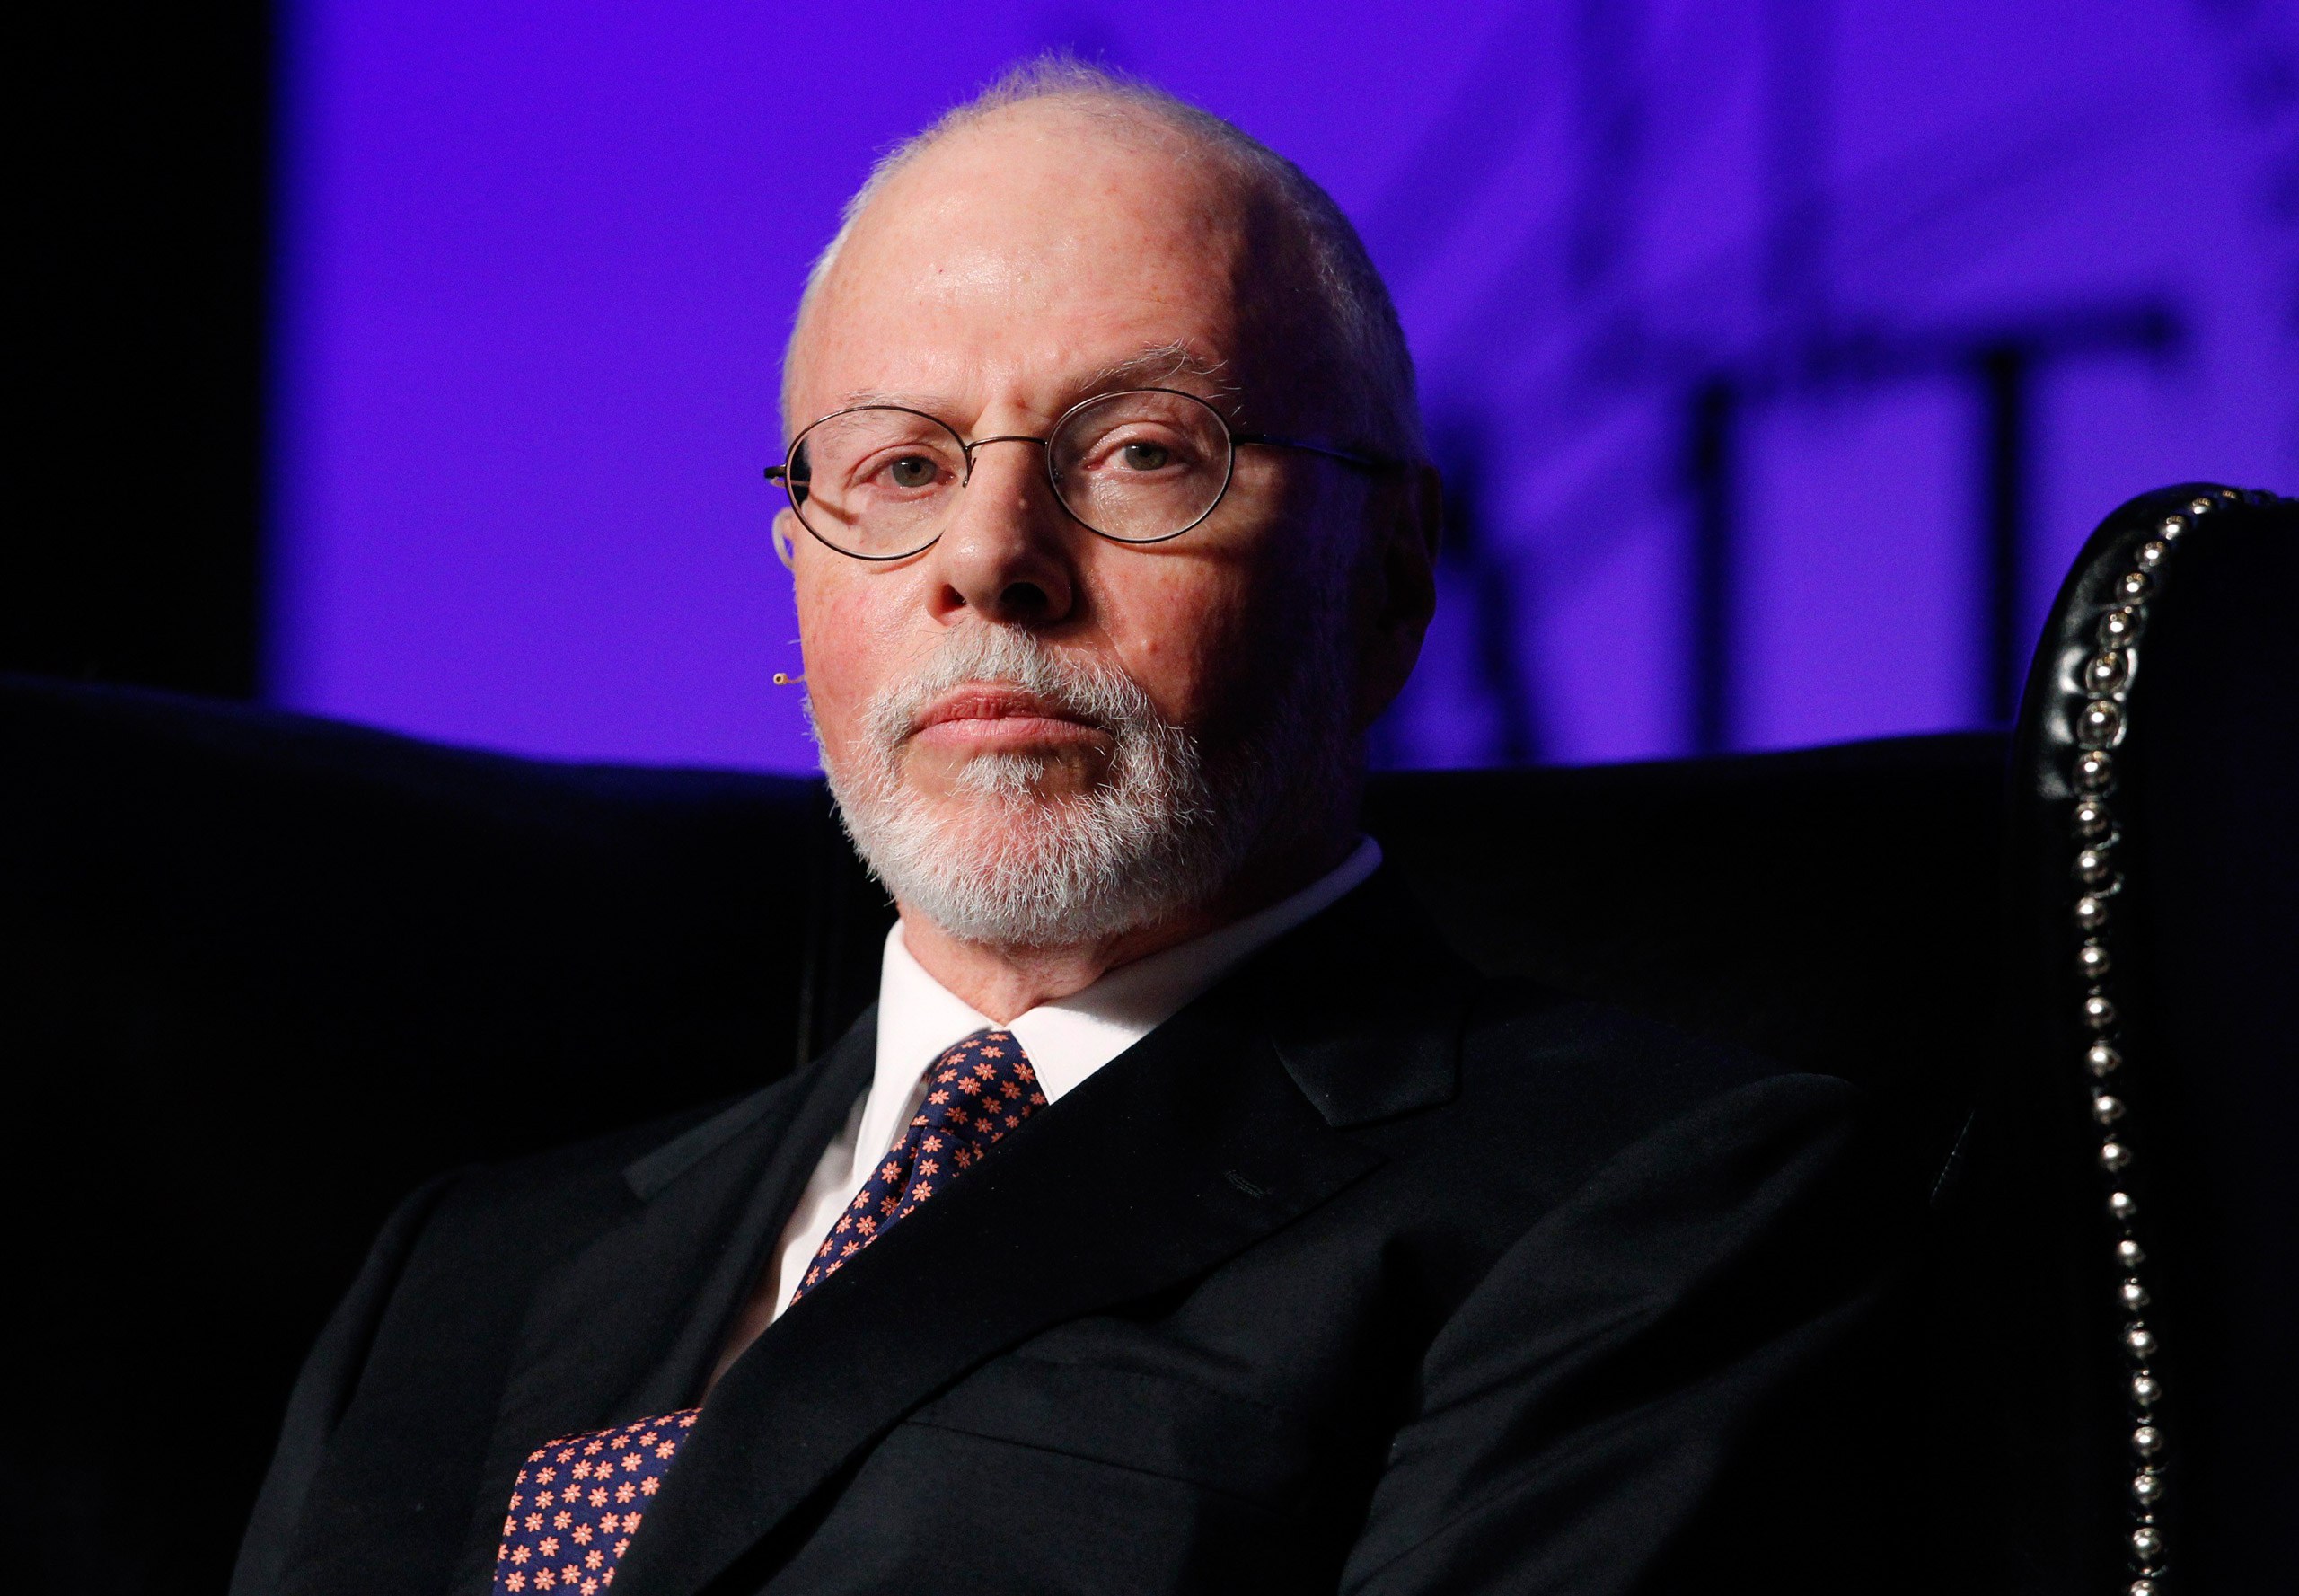 Paul Singer, founder, CEO, and co-chief investment officer for Elliott Management Corporation, attends the Skybridge Alternatives (SALT) Conference in Las Vegas on May 9, 2012. (Steve Marcus—Reuters)